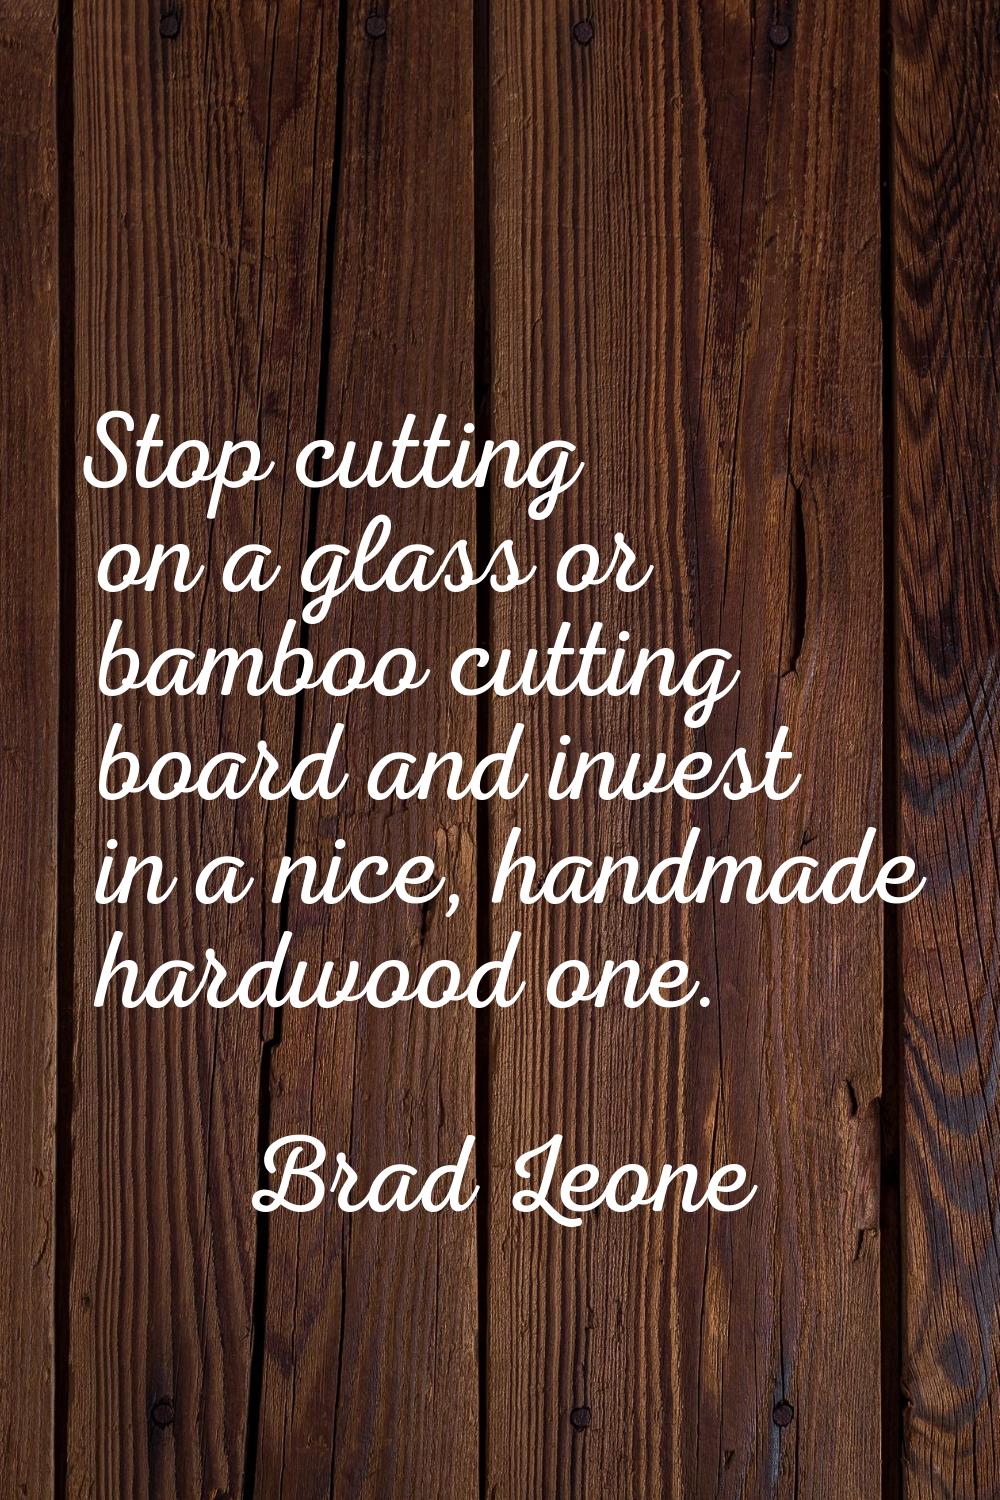 Stop cutting on a glass or bamboo cutting board and invest in a nice, handmade hardwood one.